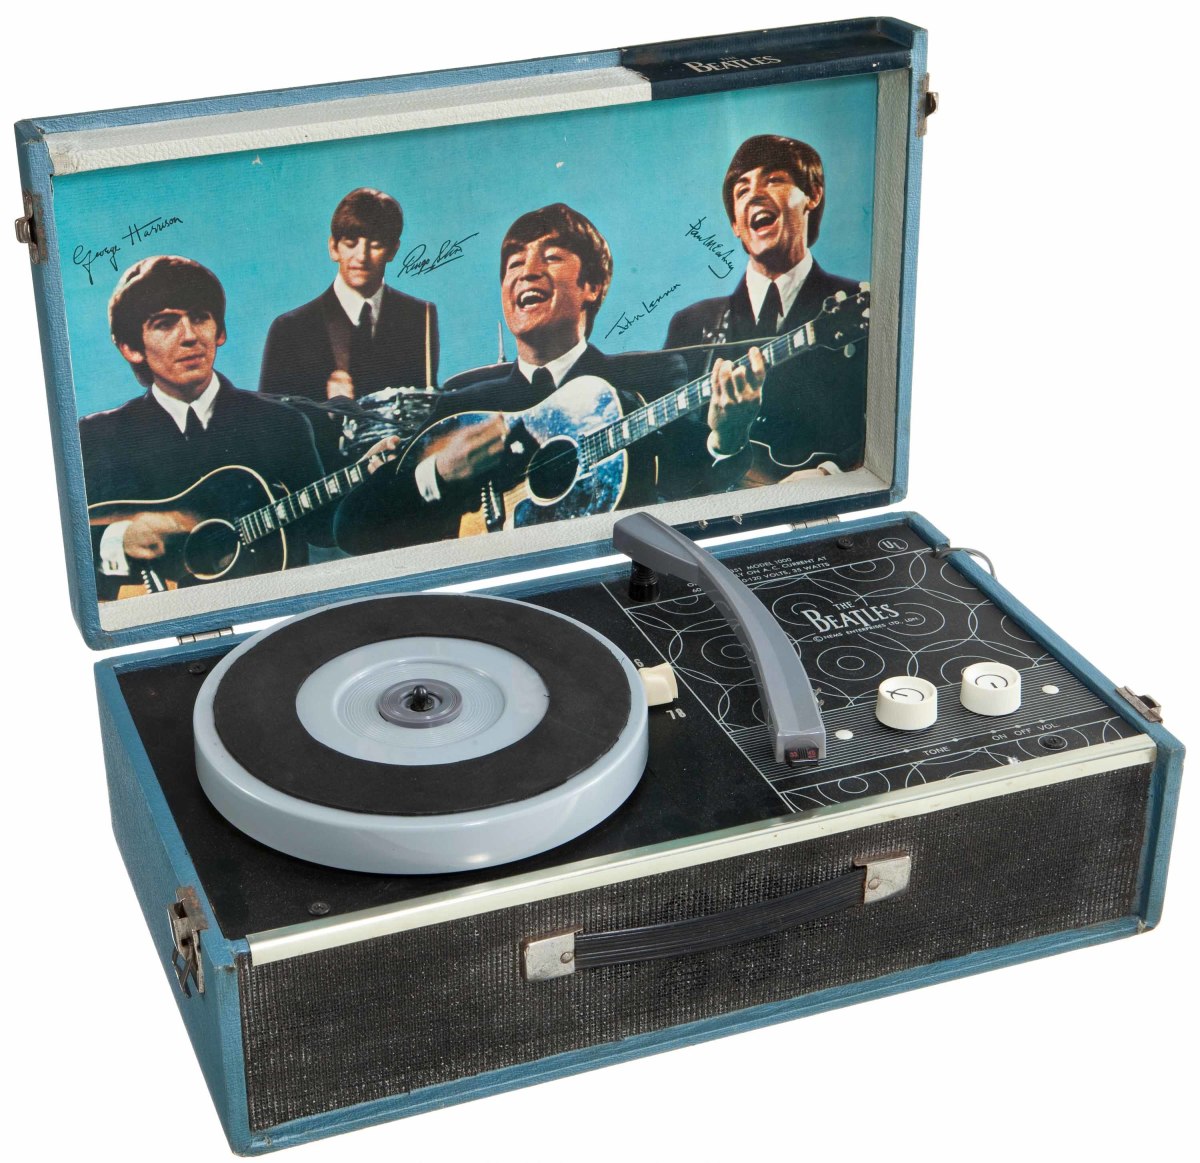 Beatles record player